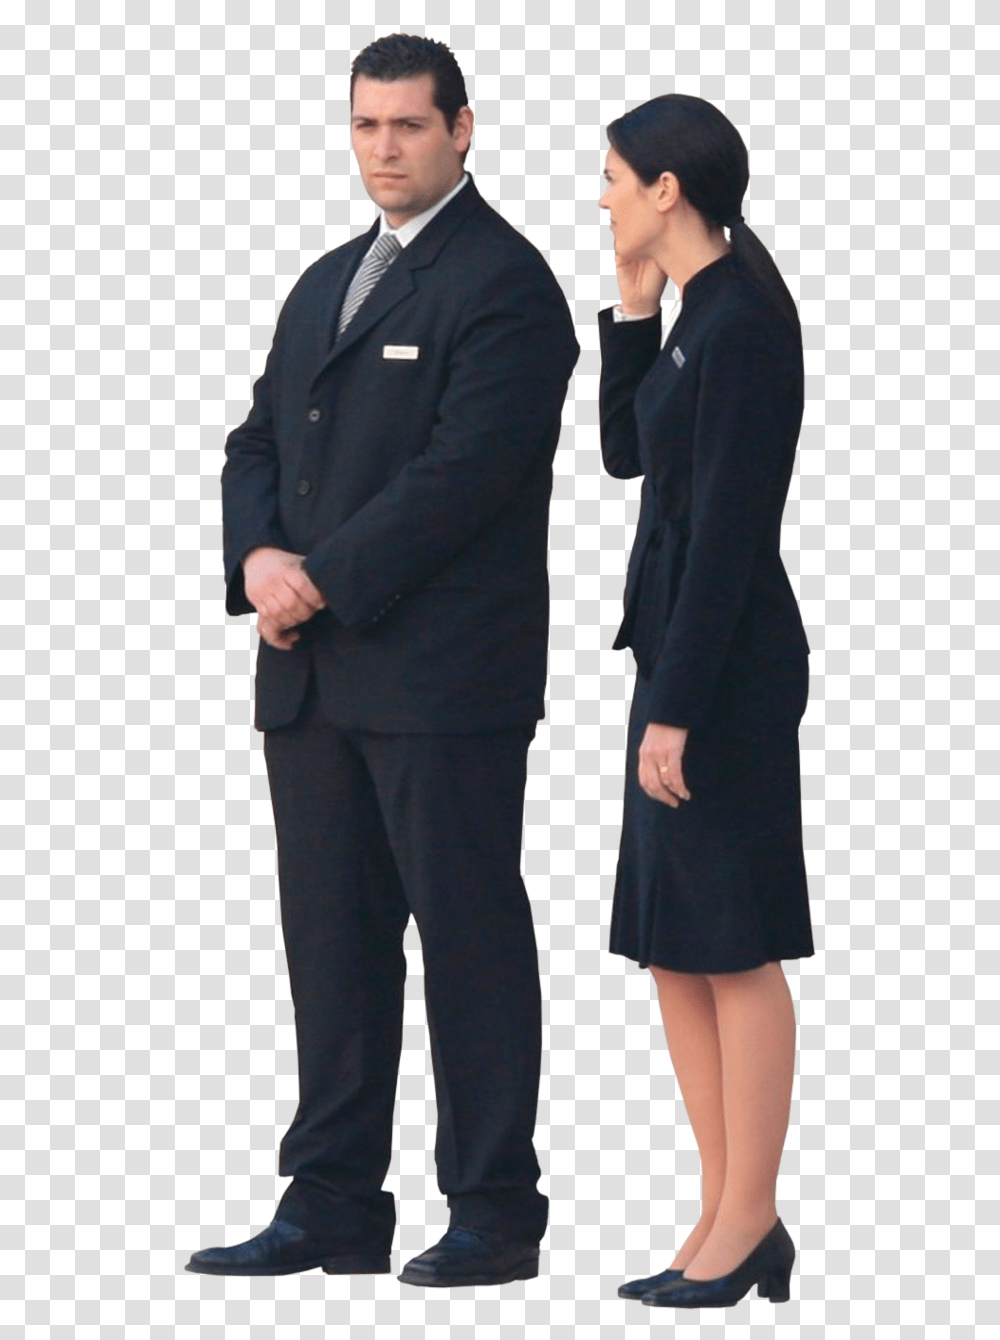 Business People Photos Business People, Apparel, Suit, Overcoat Transparent Png